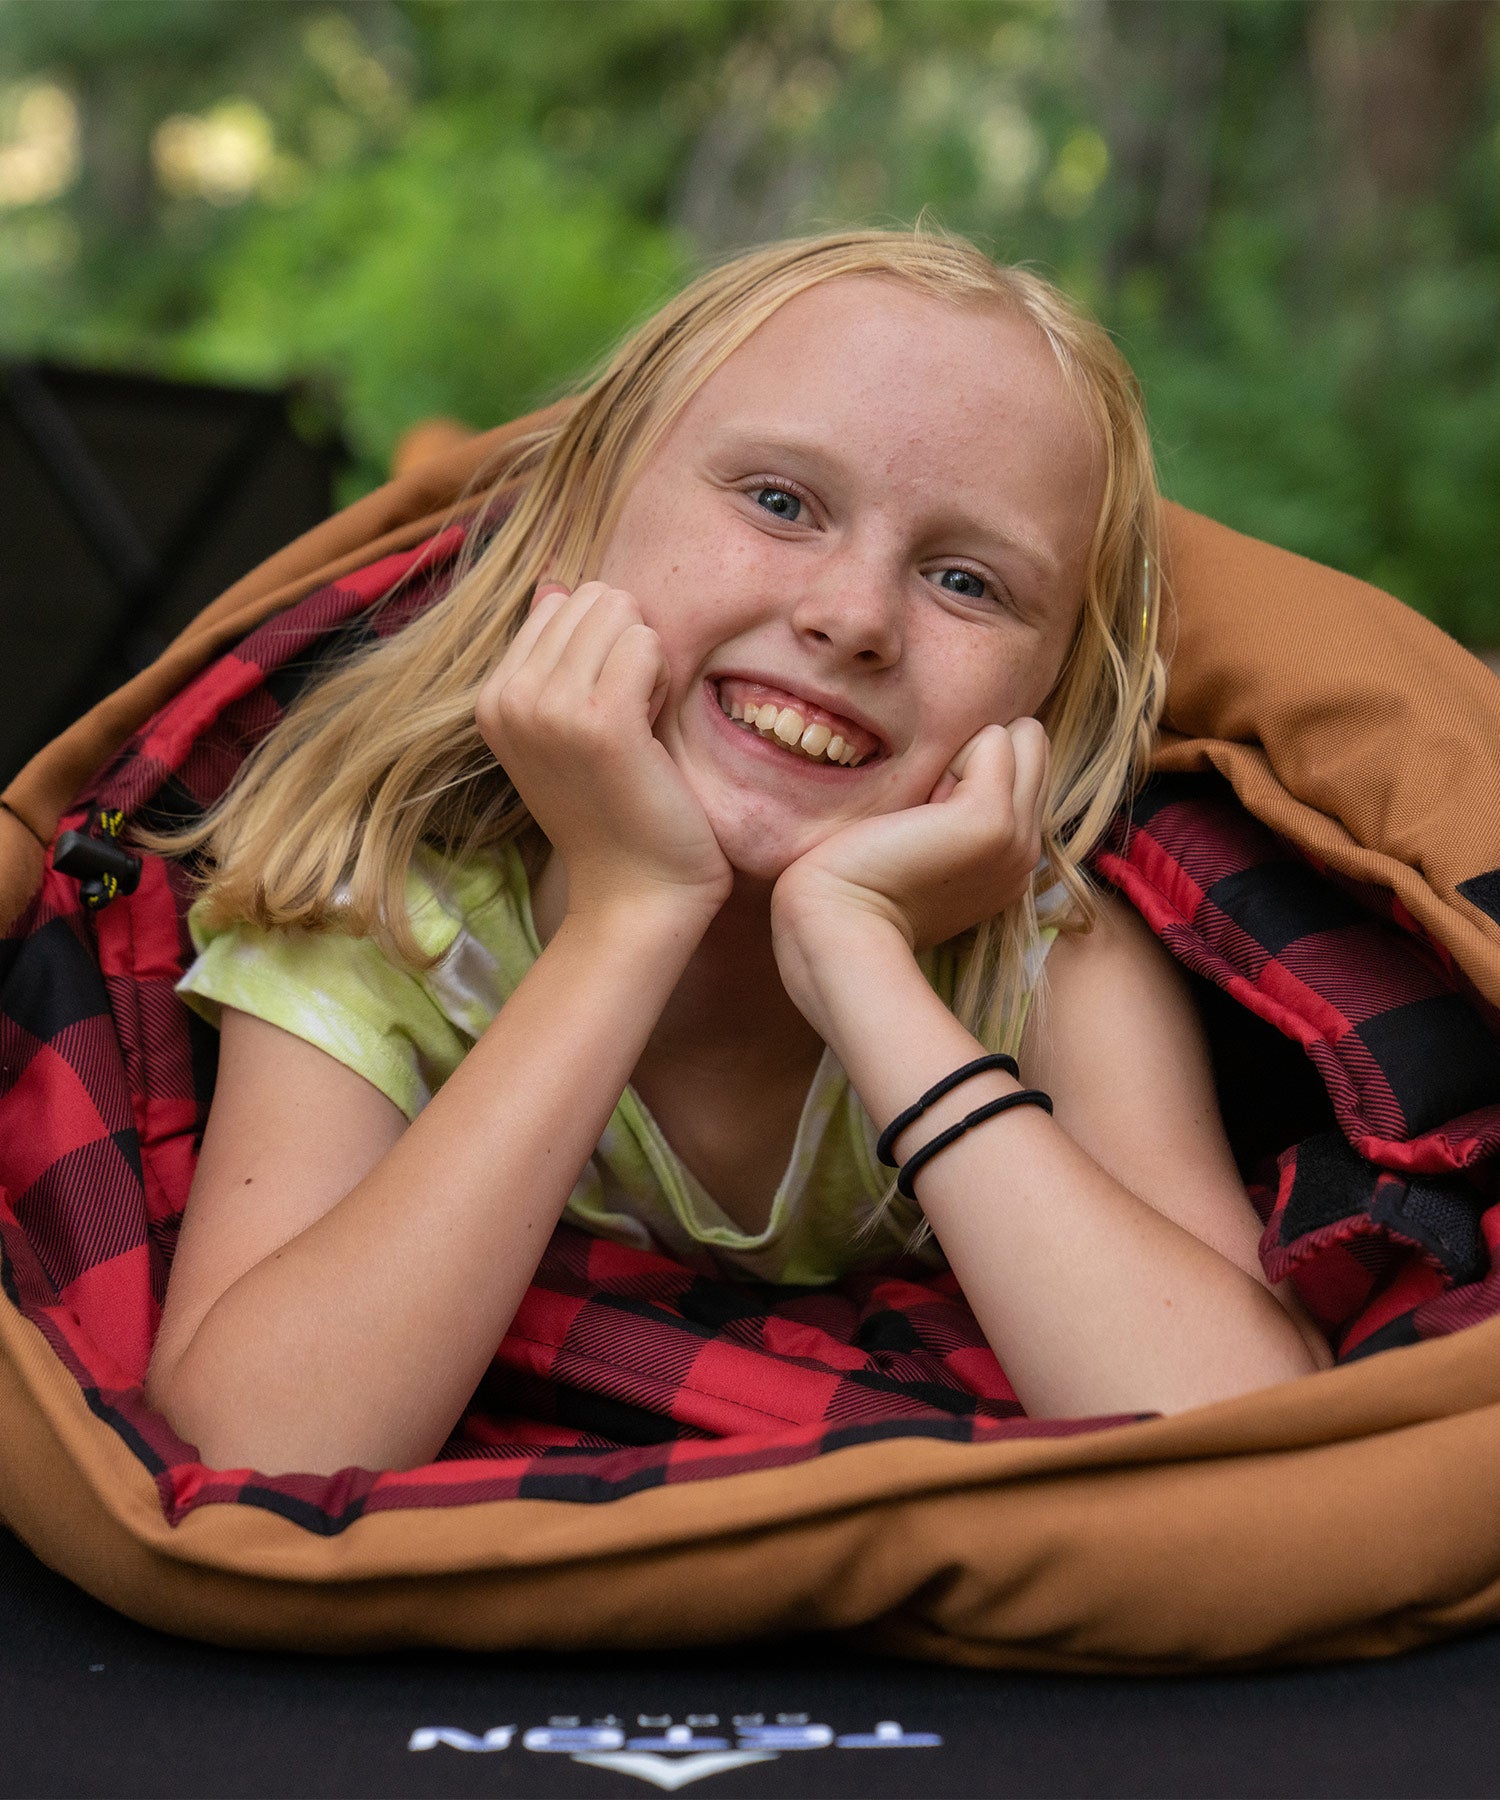 Image shows a young girl smiling while snuggled in a brown TETON Sports Bridger Canvas Sleeping Bag.